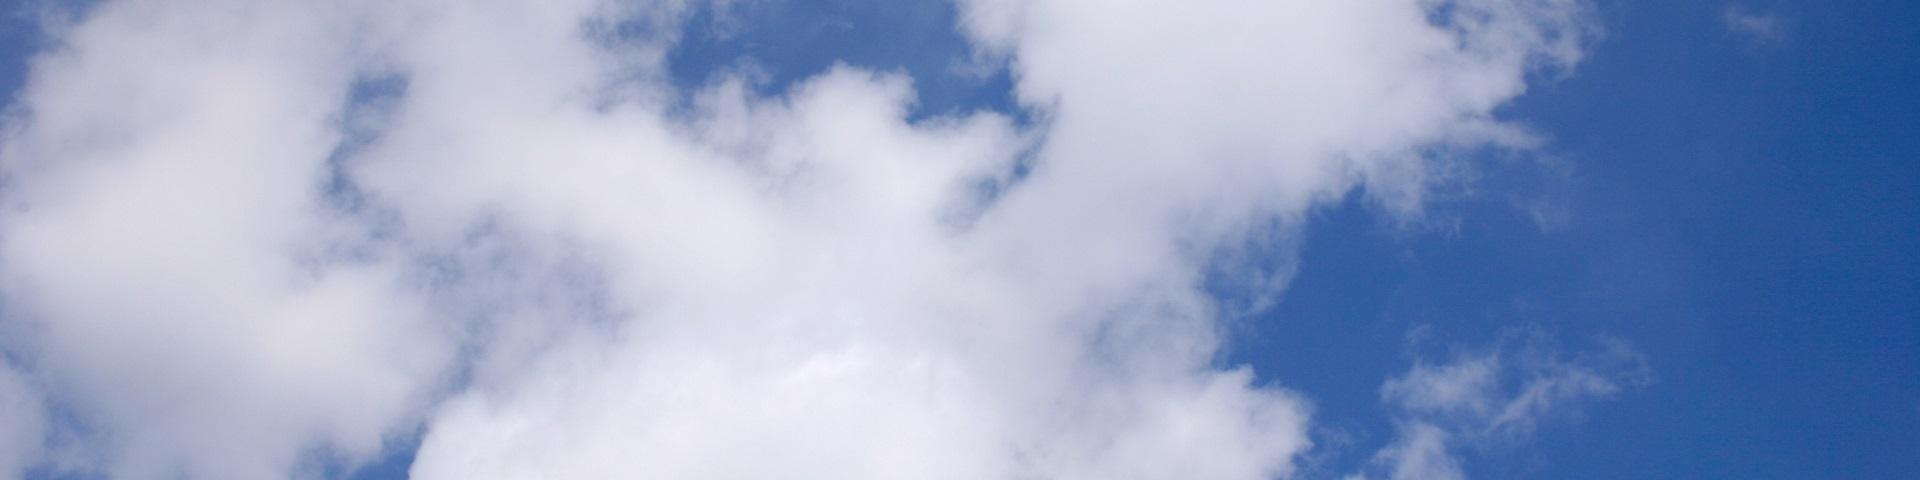 Image of clouds in the air